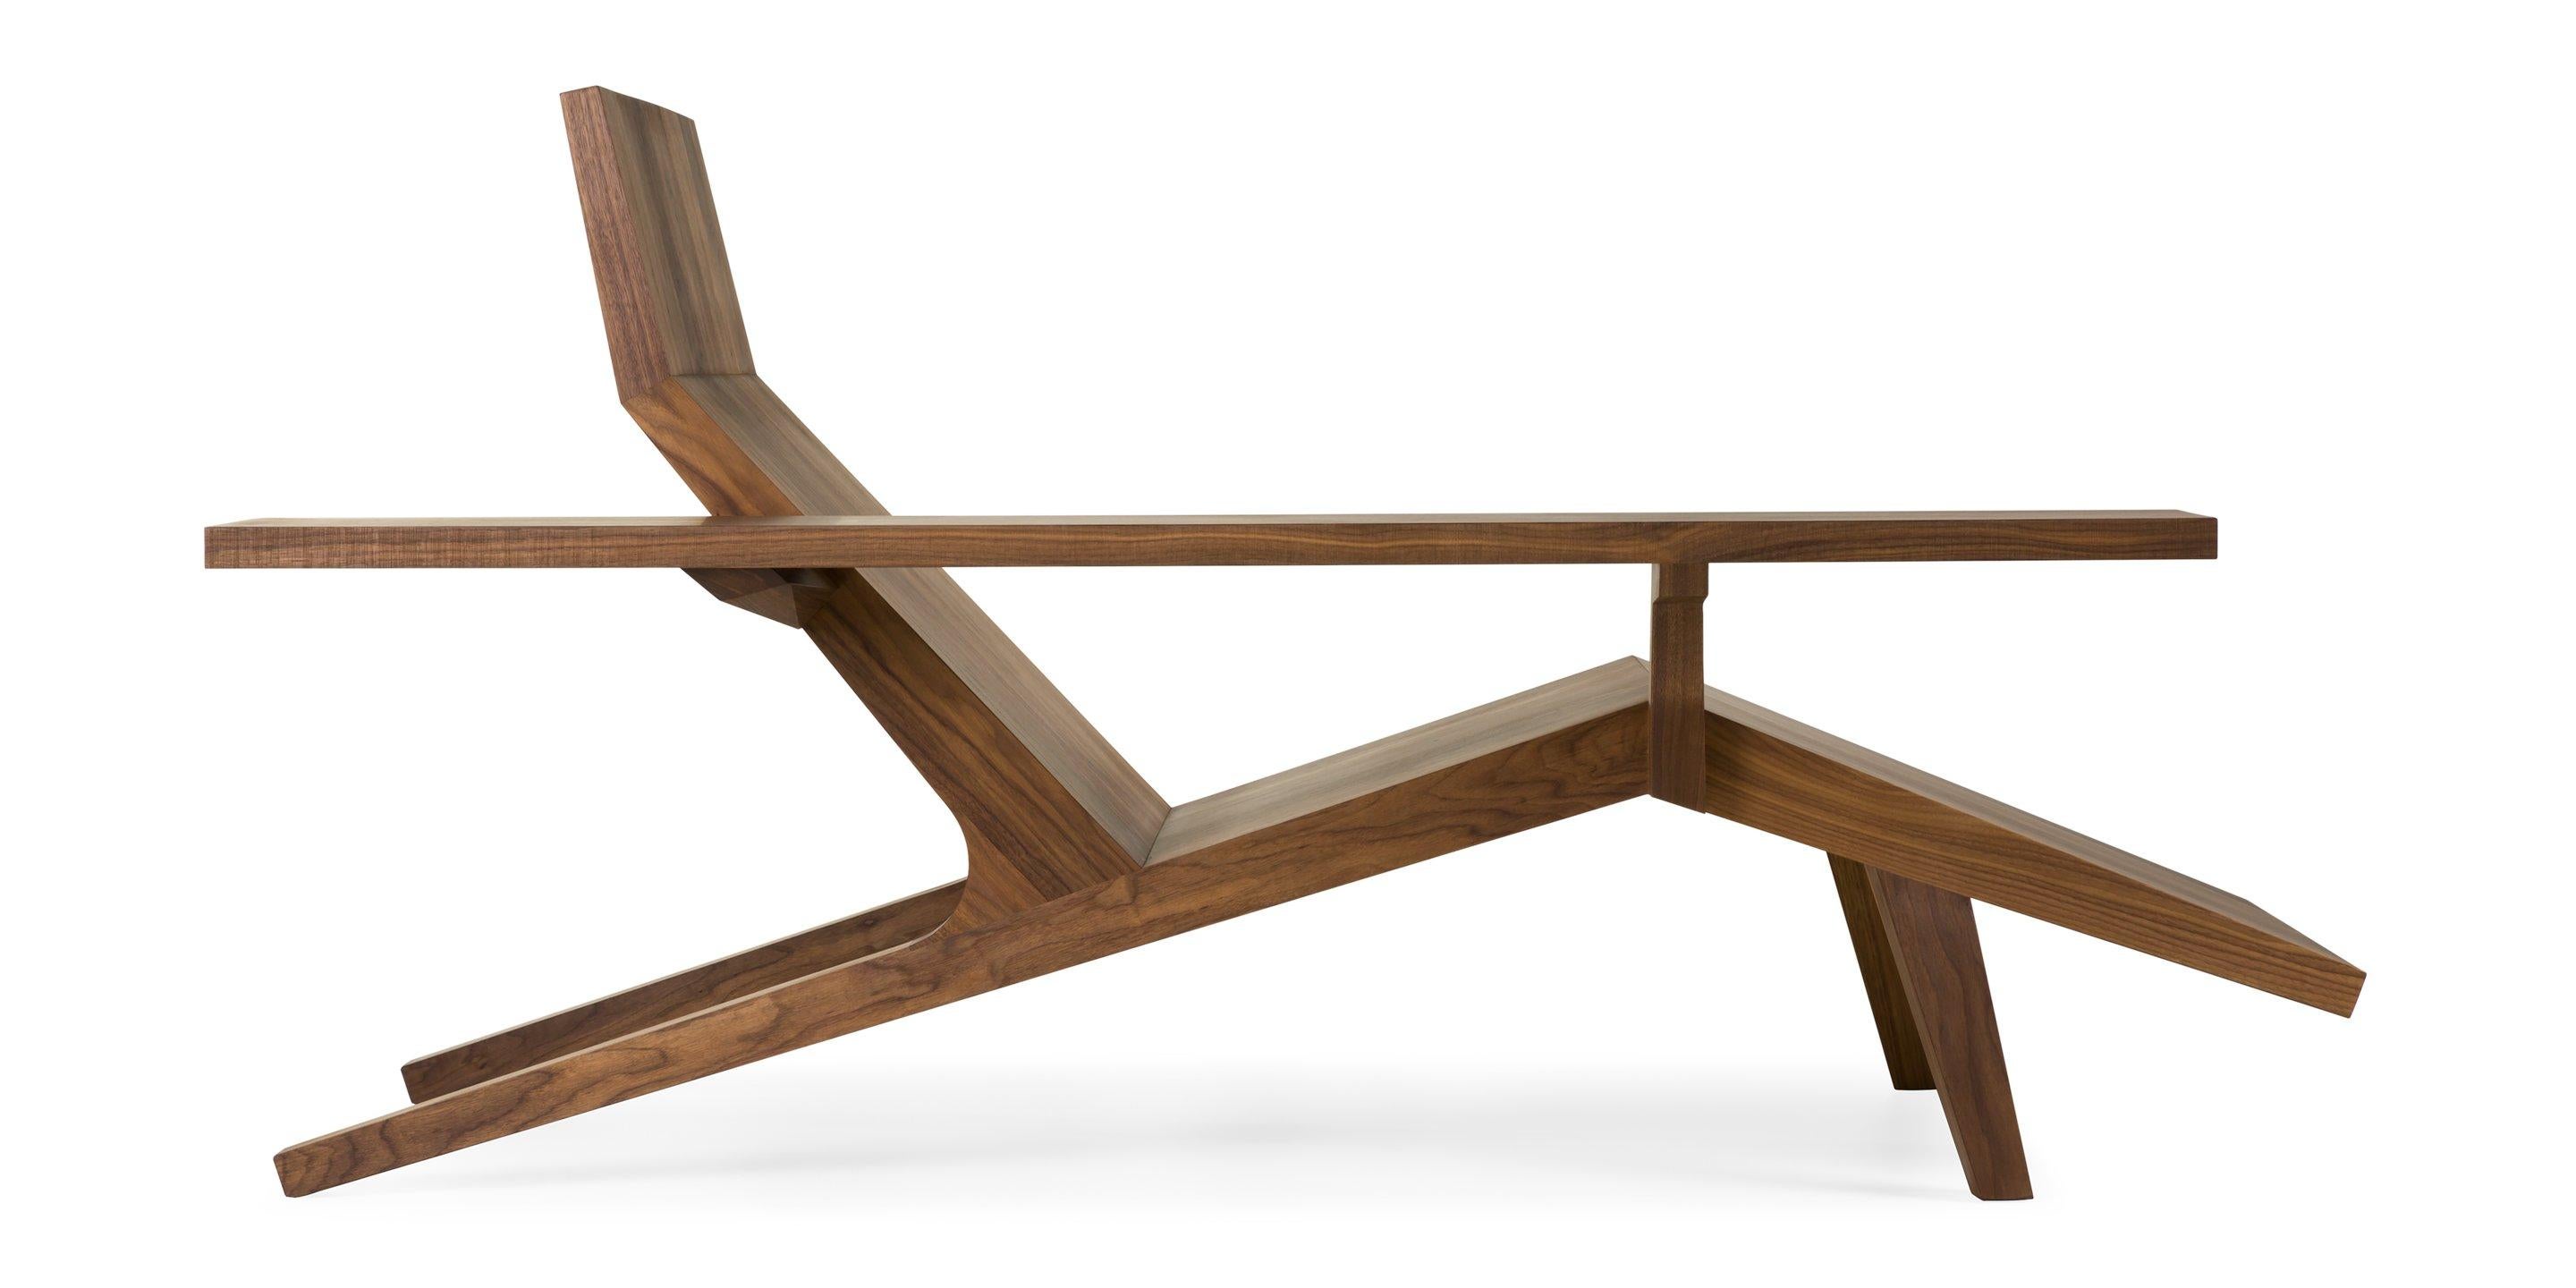 Moooi Liberty Lounger Chair in American Walnut by Atelier Van Lieshout In New Condition For Sale In Brooklyn, NY